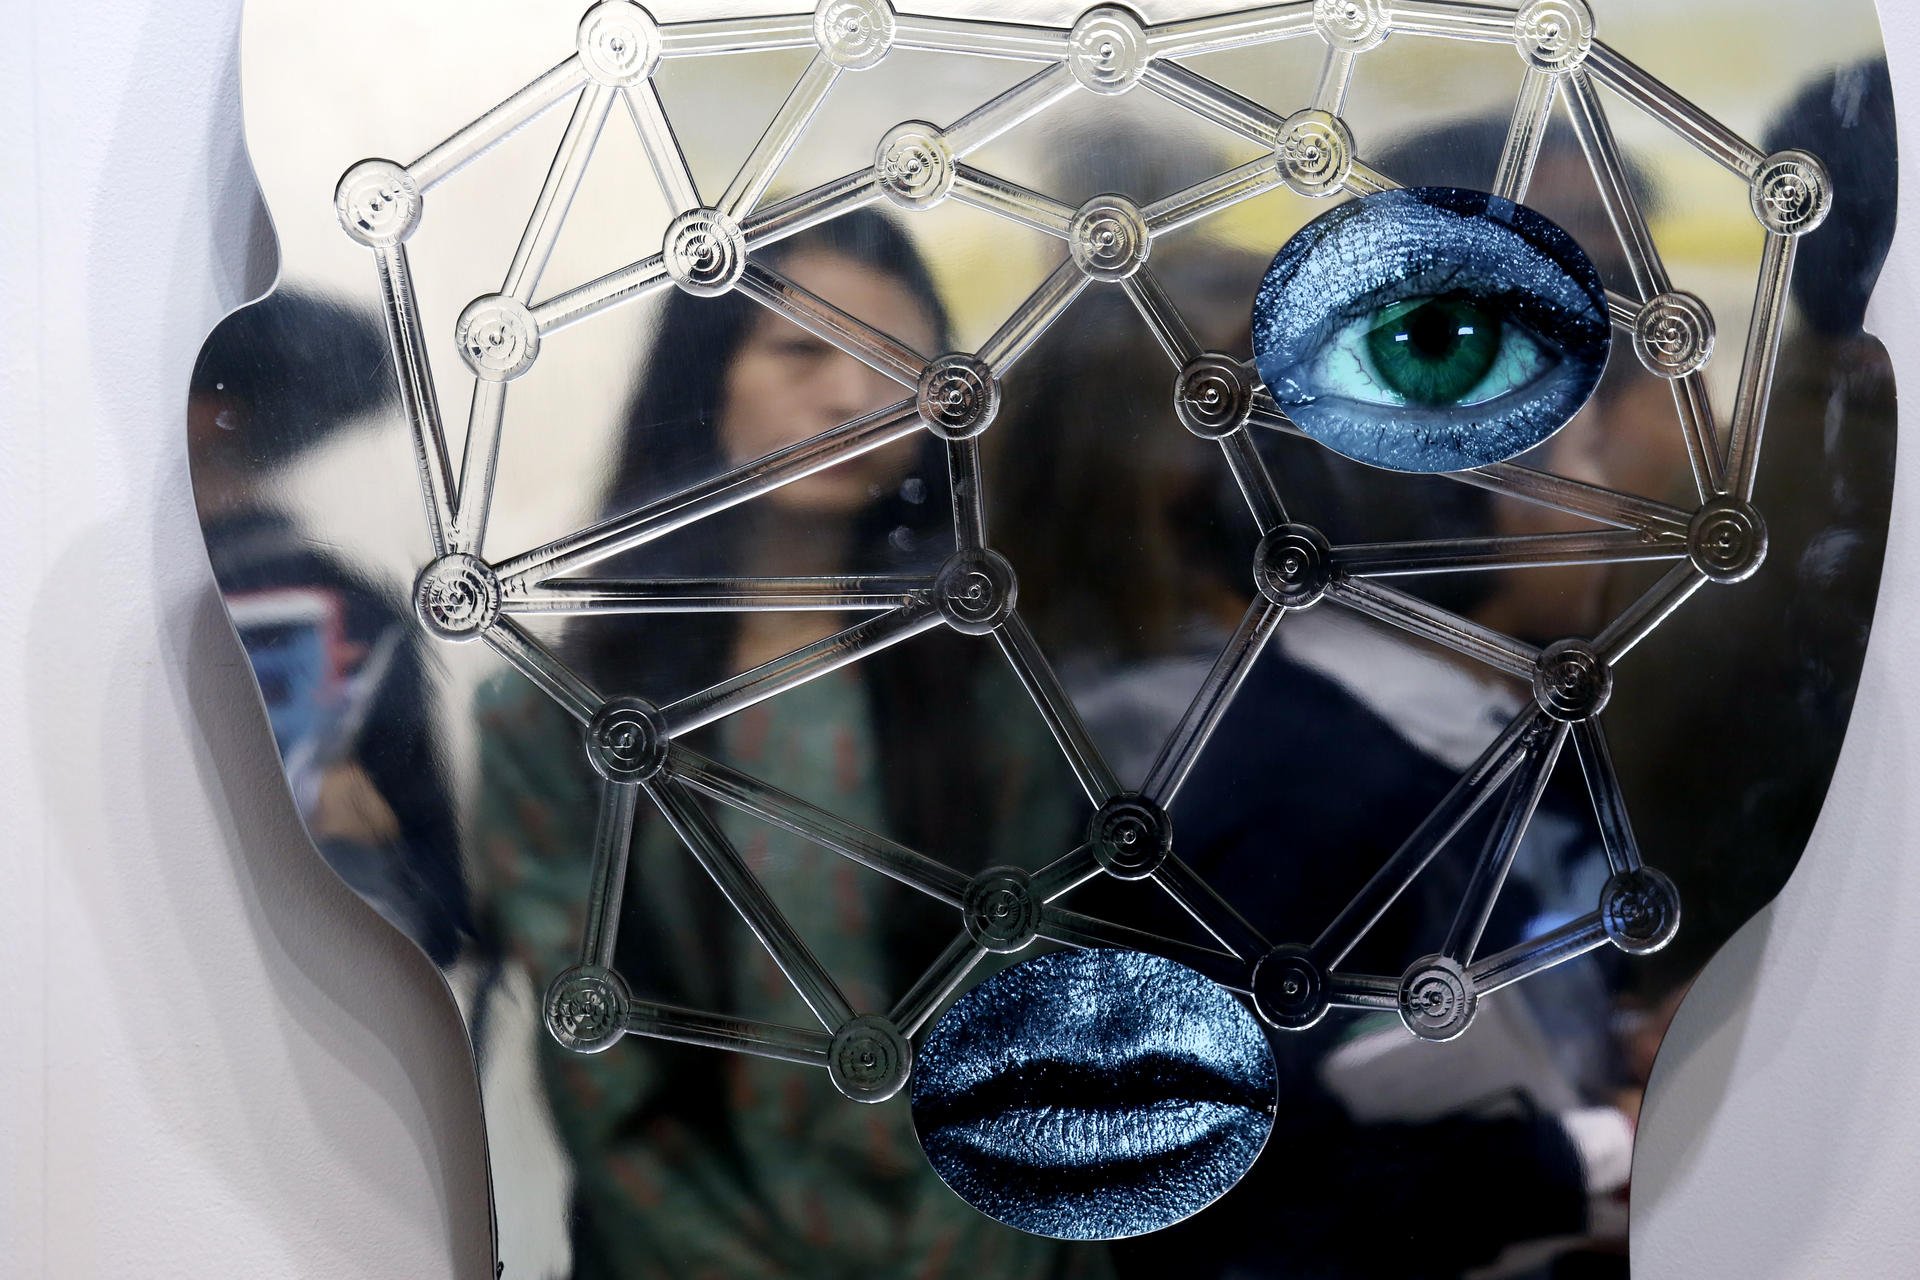 A visitor walks behind an artwork by Tony Oursler at the Art Basel extravaganza.Photos: Nora Tam